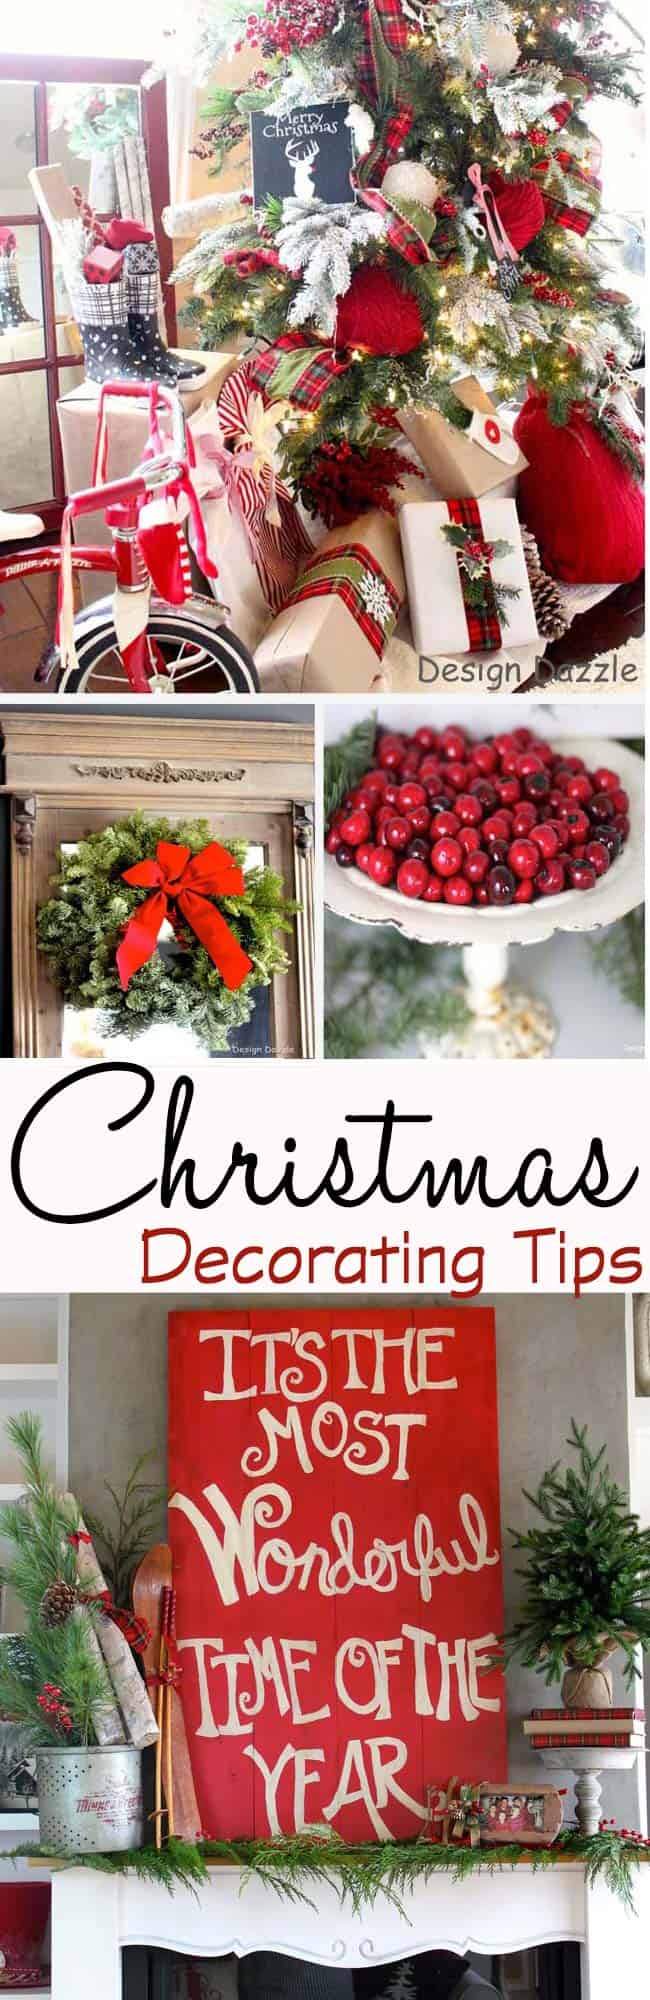 Christmas home decor with decorating ideas and tips. Design Dazzle